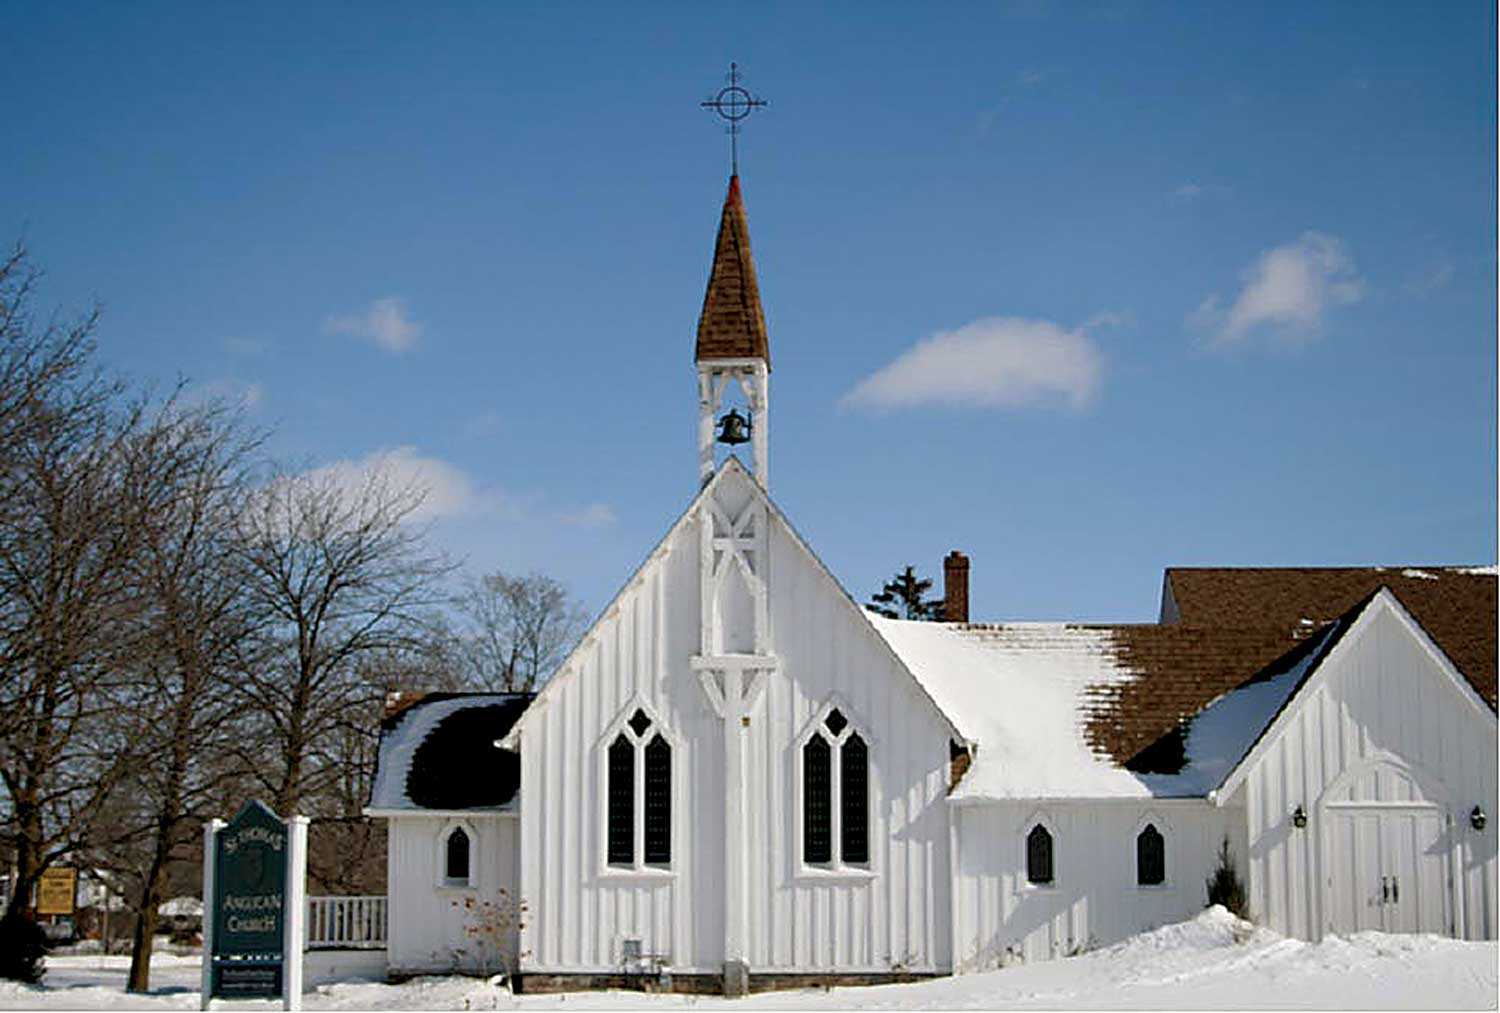 St. Thomas Anglican Church, Brooklin, is a notable example of Camdenian Gothic executed in wood (Photo courtesy of Candace Iron)